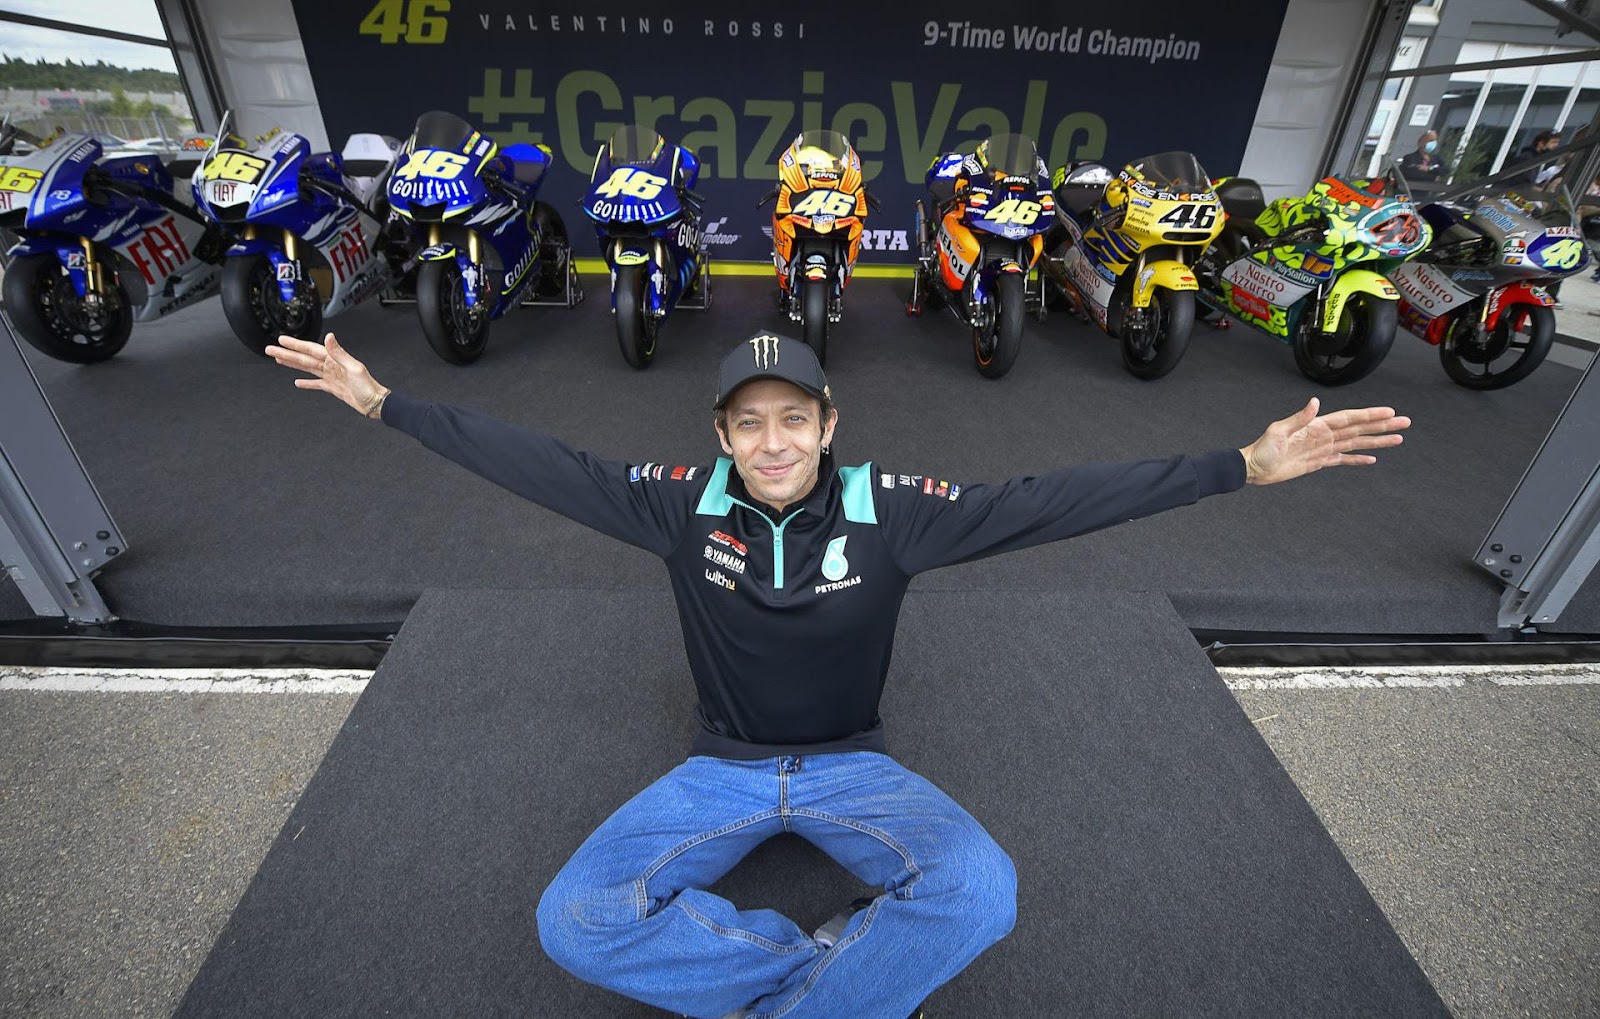 Valentino Rossi with all his winning bikes.